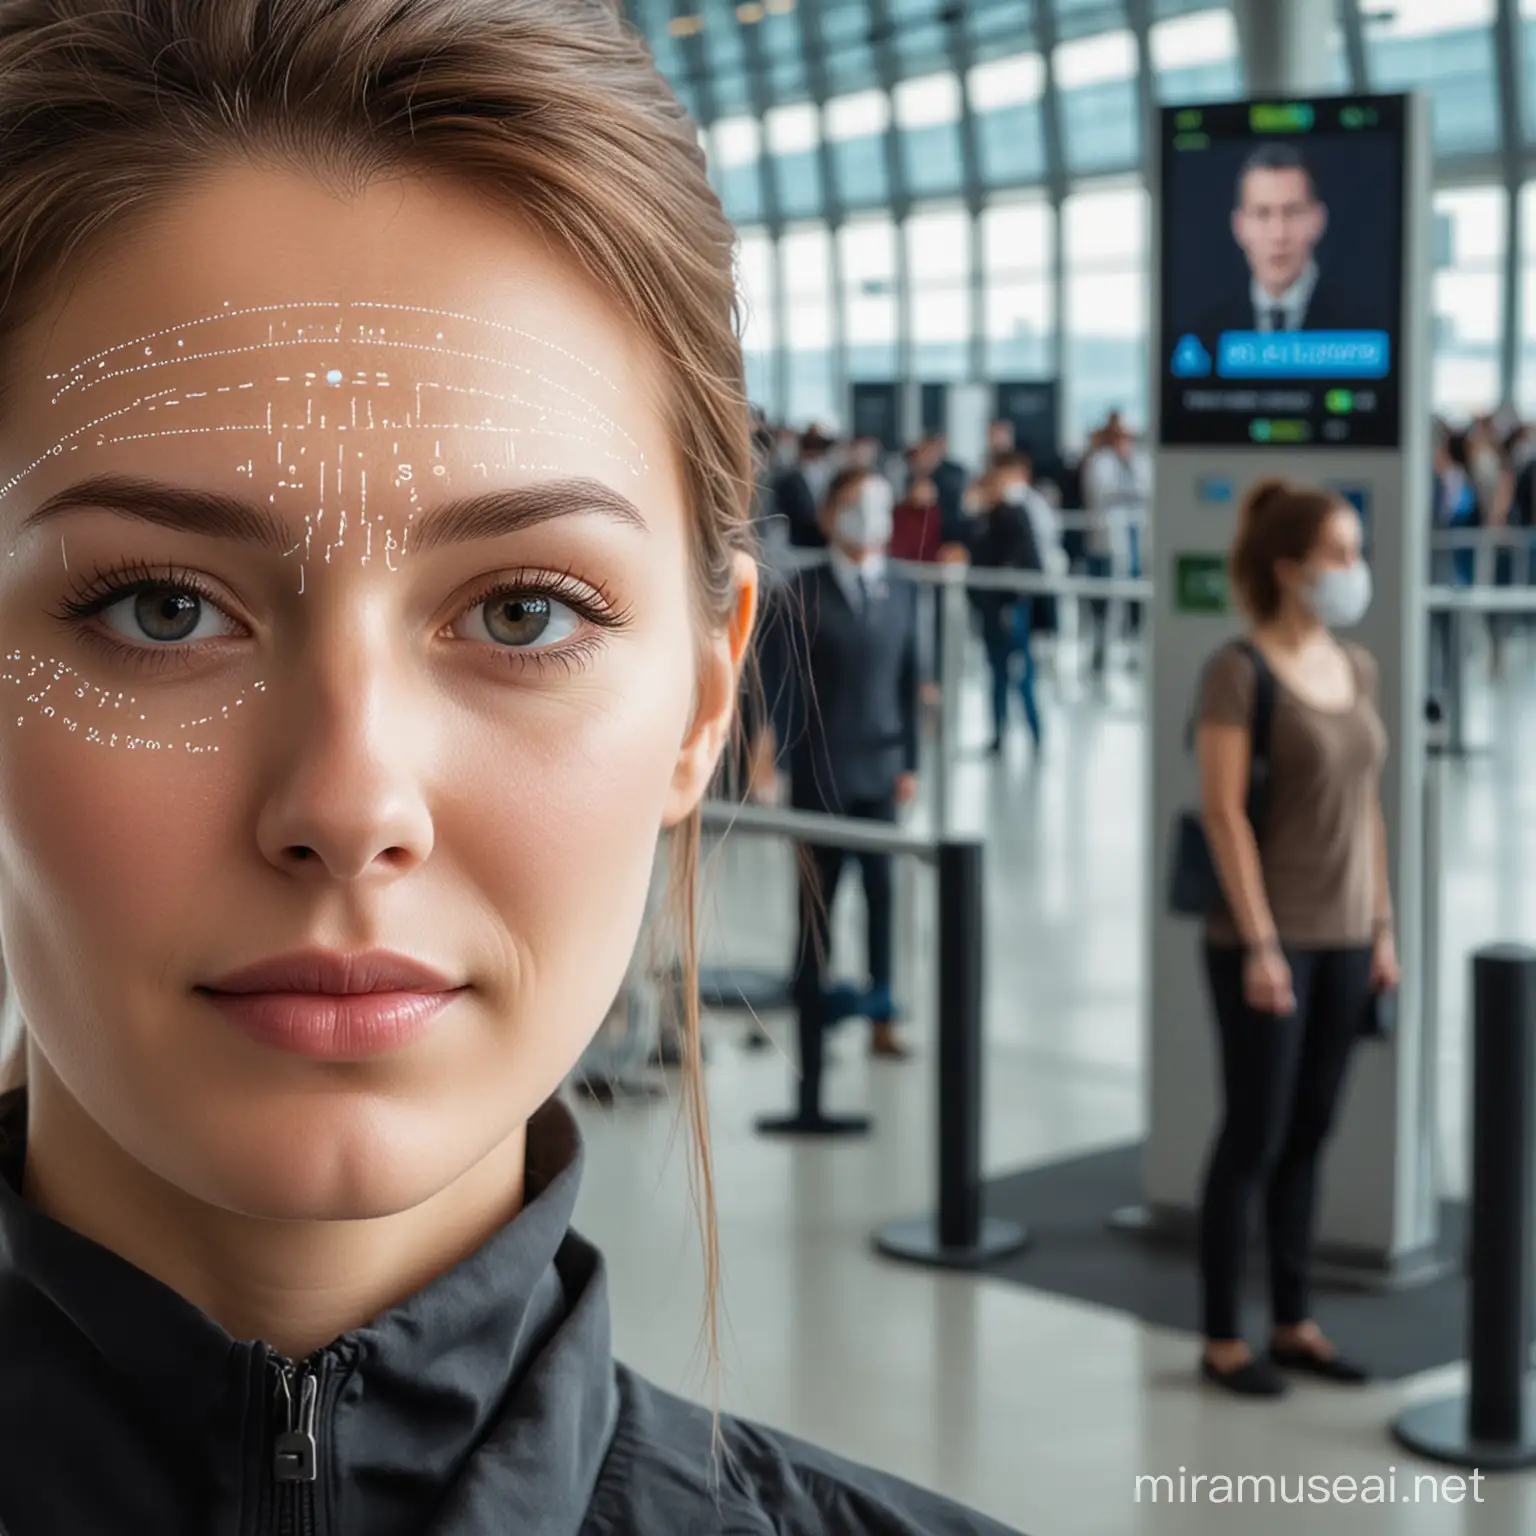 Biometric Face Recognition at the Airport Terminal